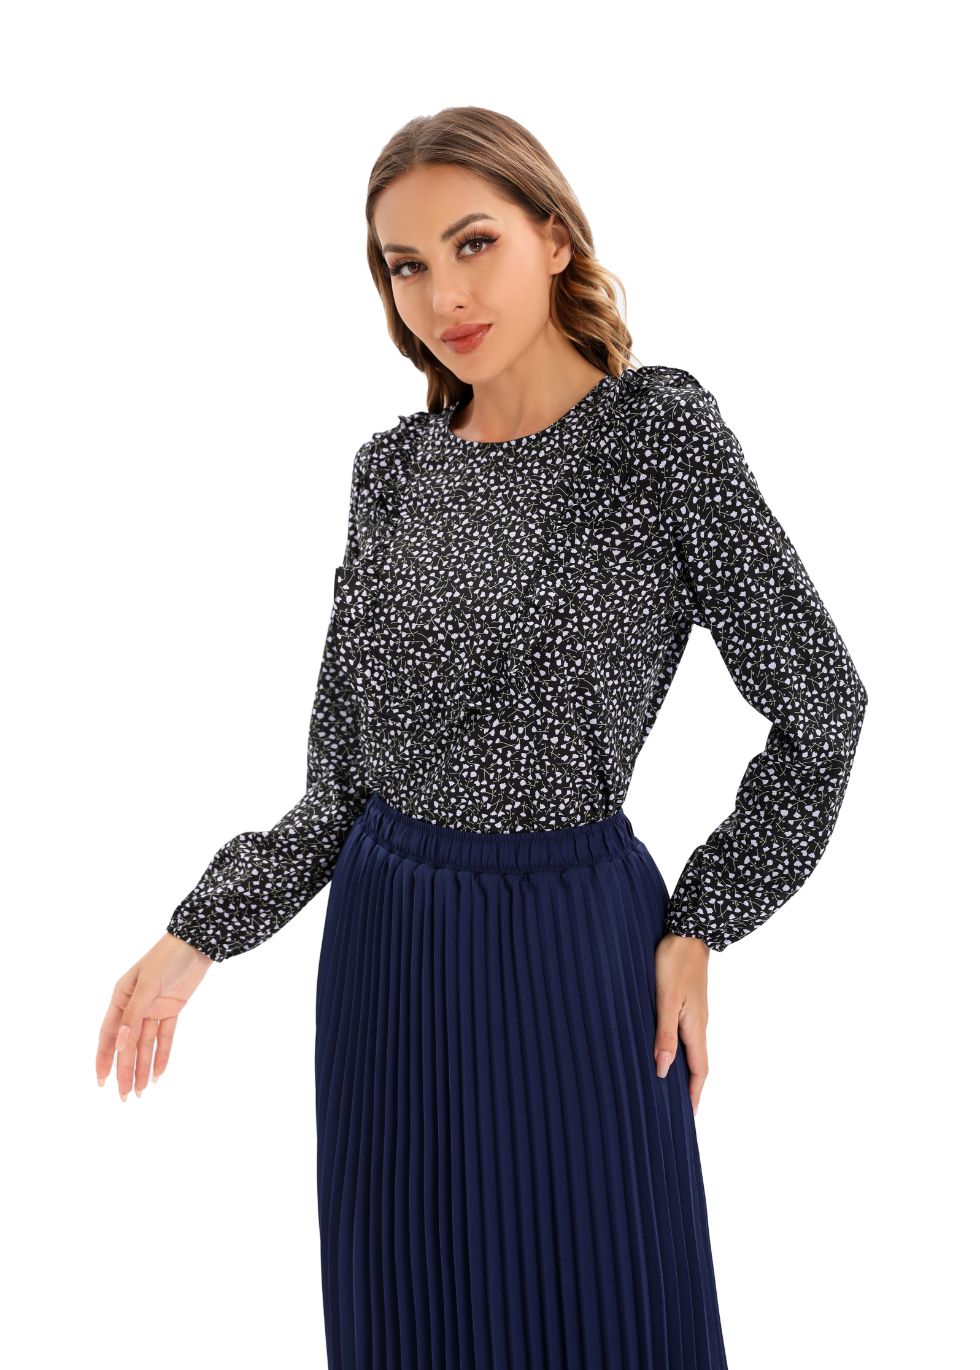 Micro Print Blouse with Long Sleeves and Bib Front - alamaud